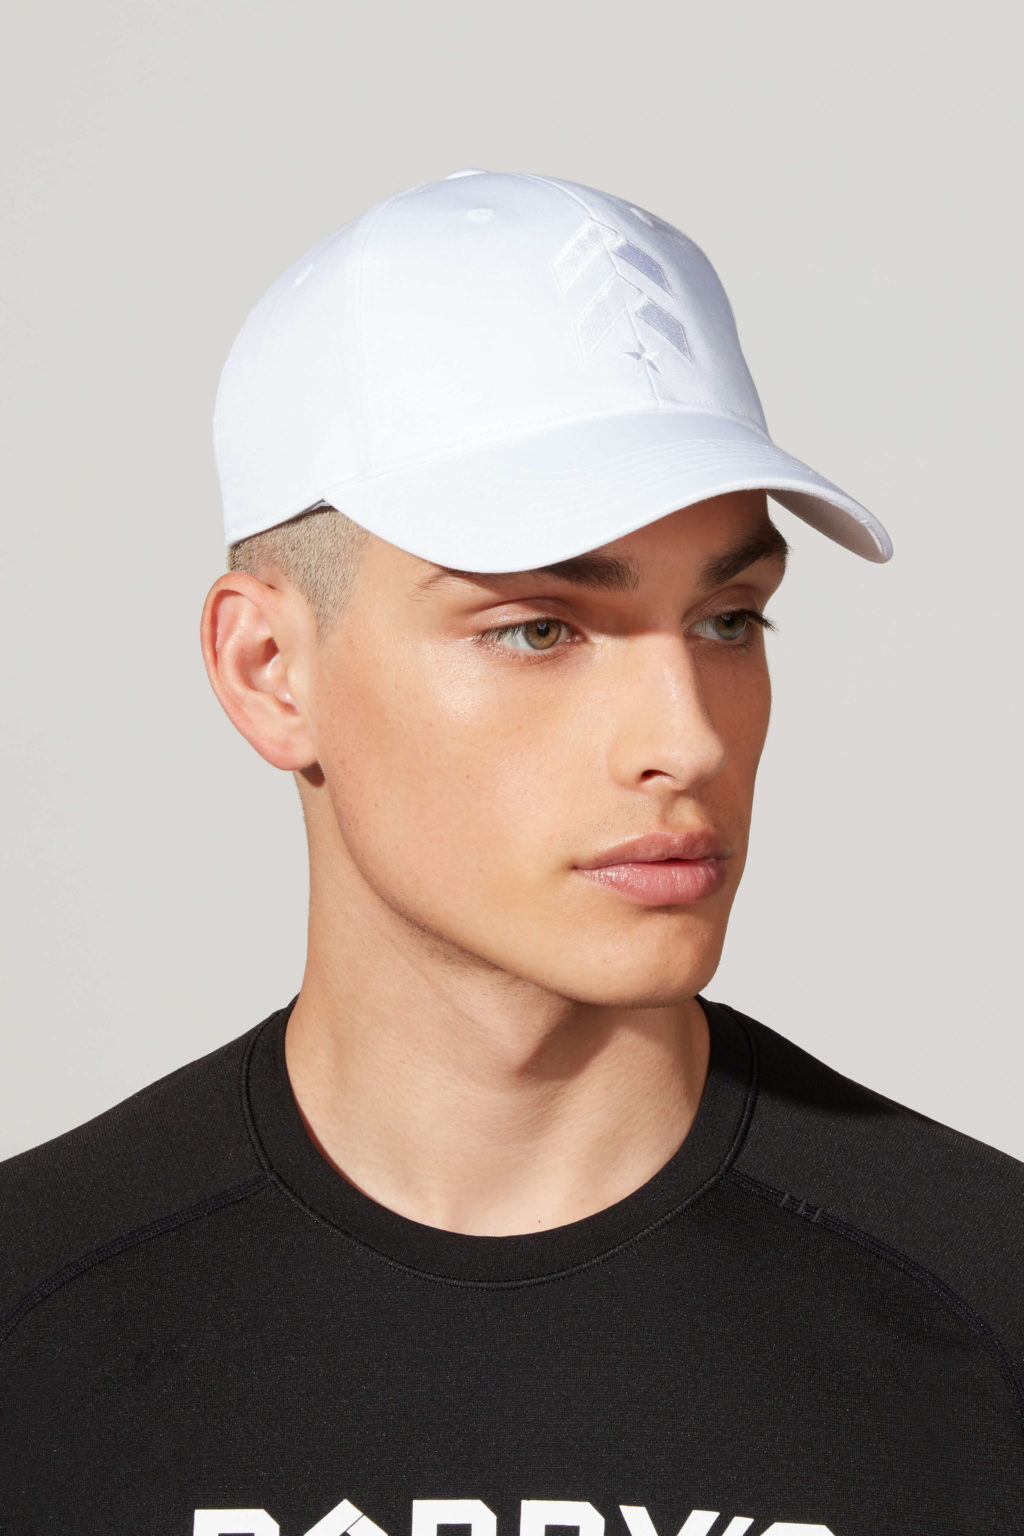 A male model with black tshirt and white cap